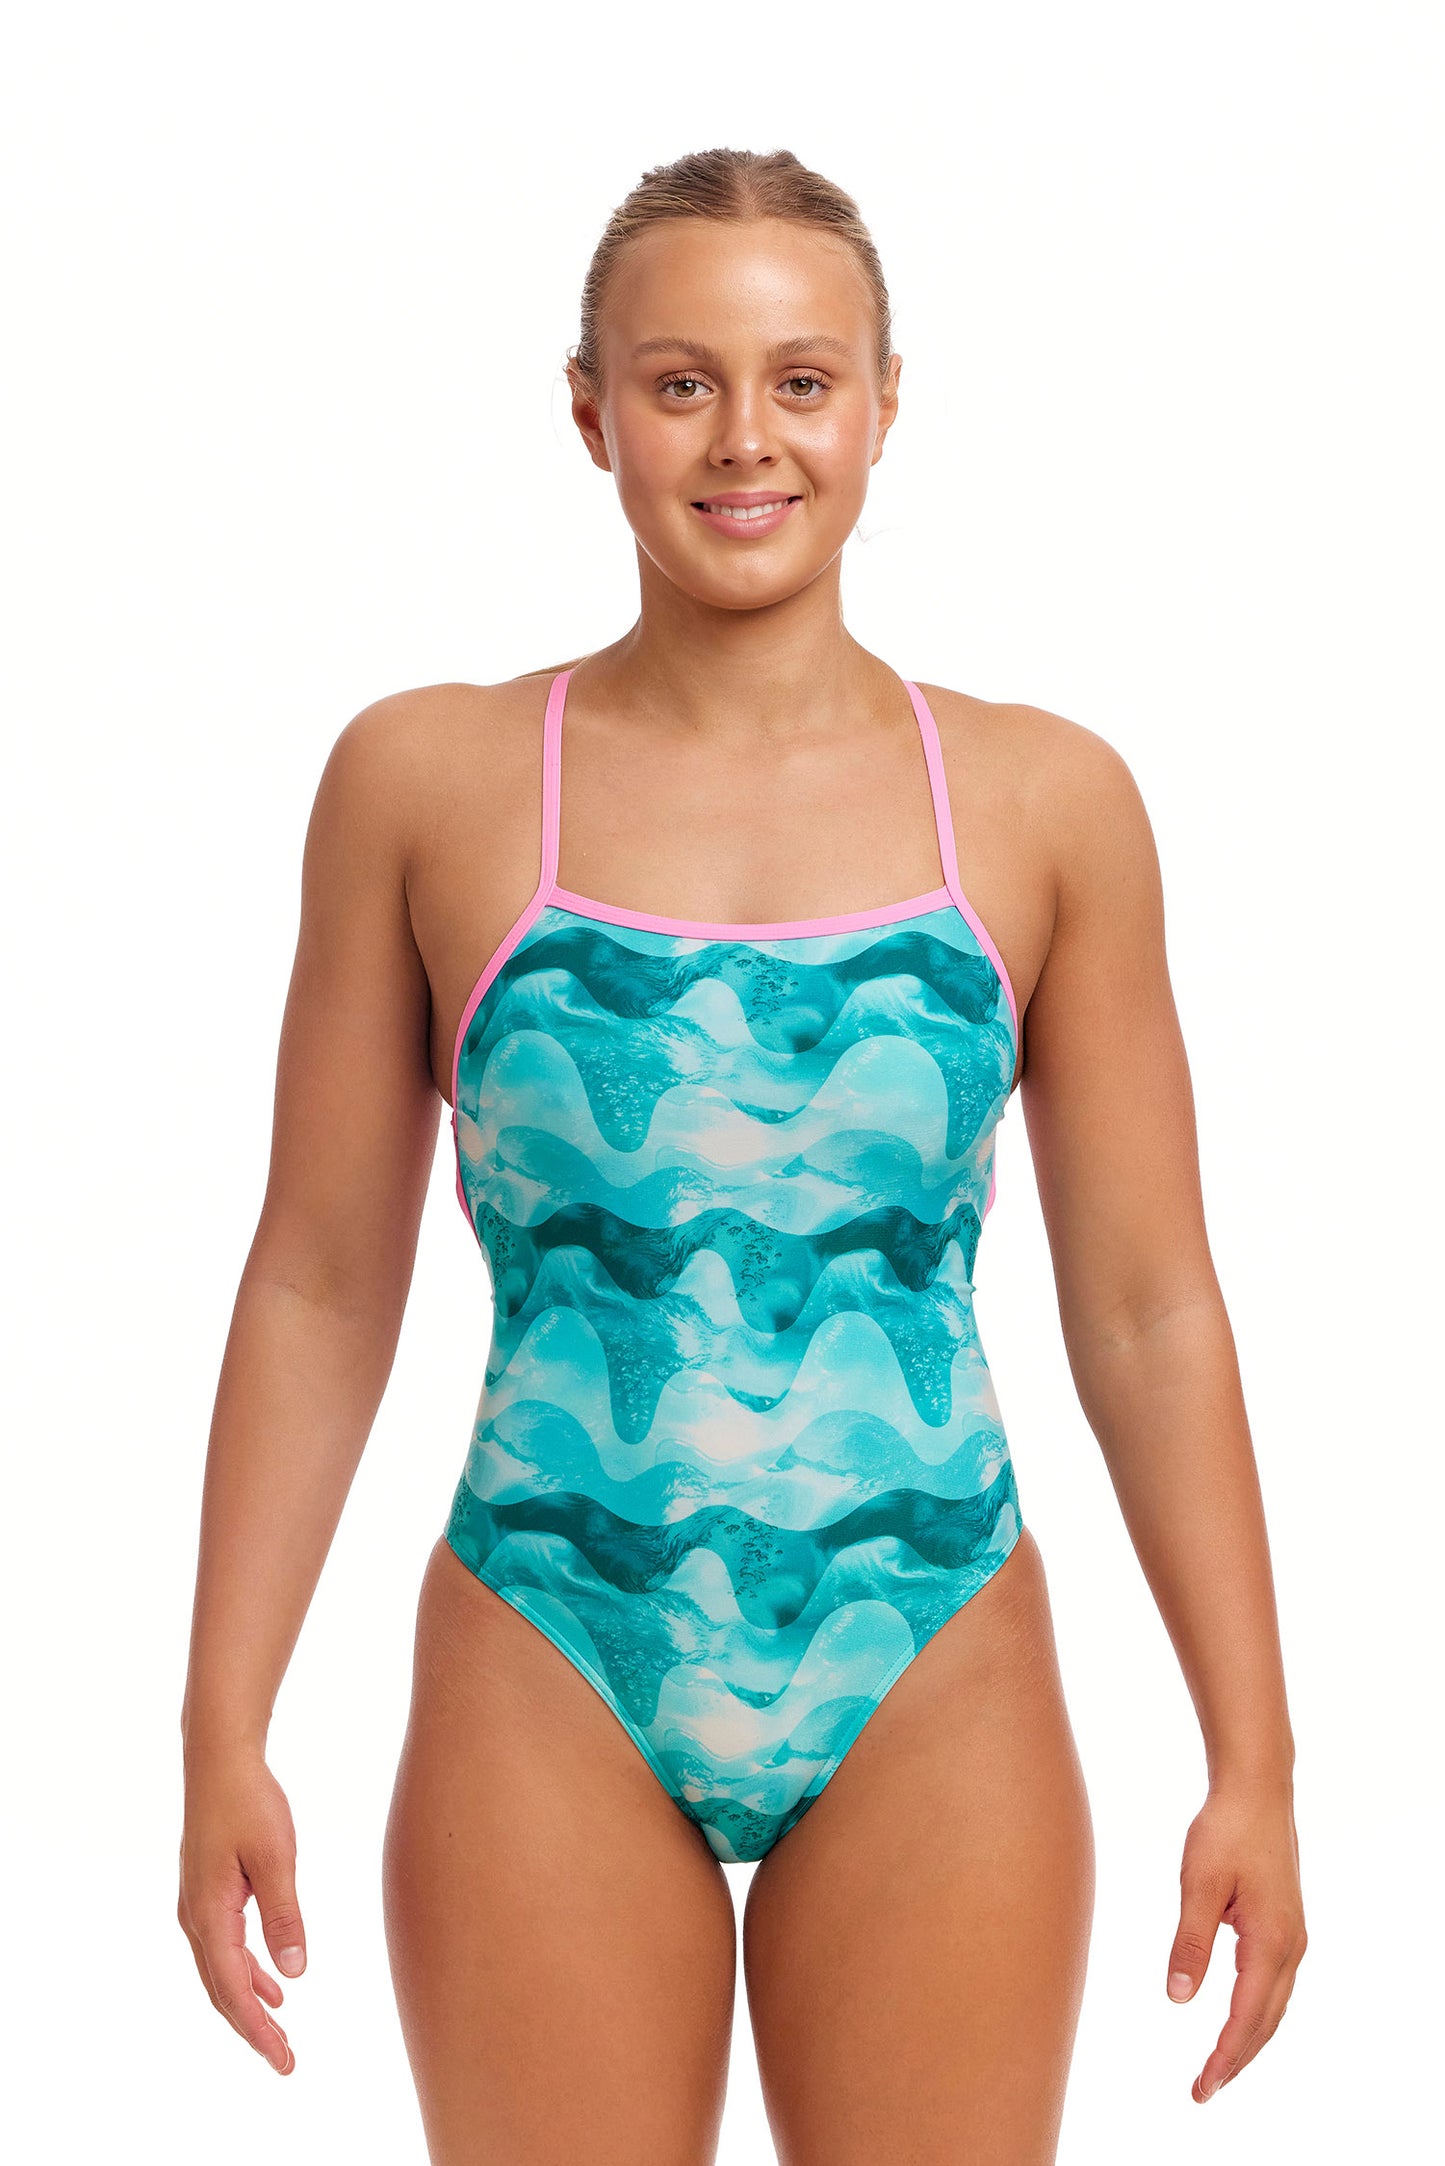 NEW! Funkita Ladies Eco Strapped In One Piece Teal Wave